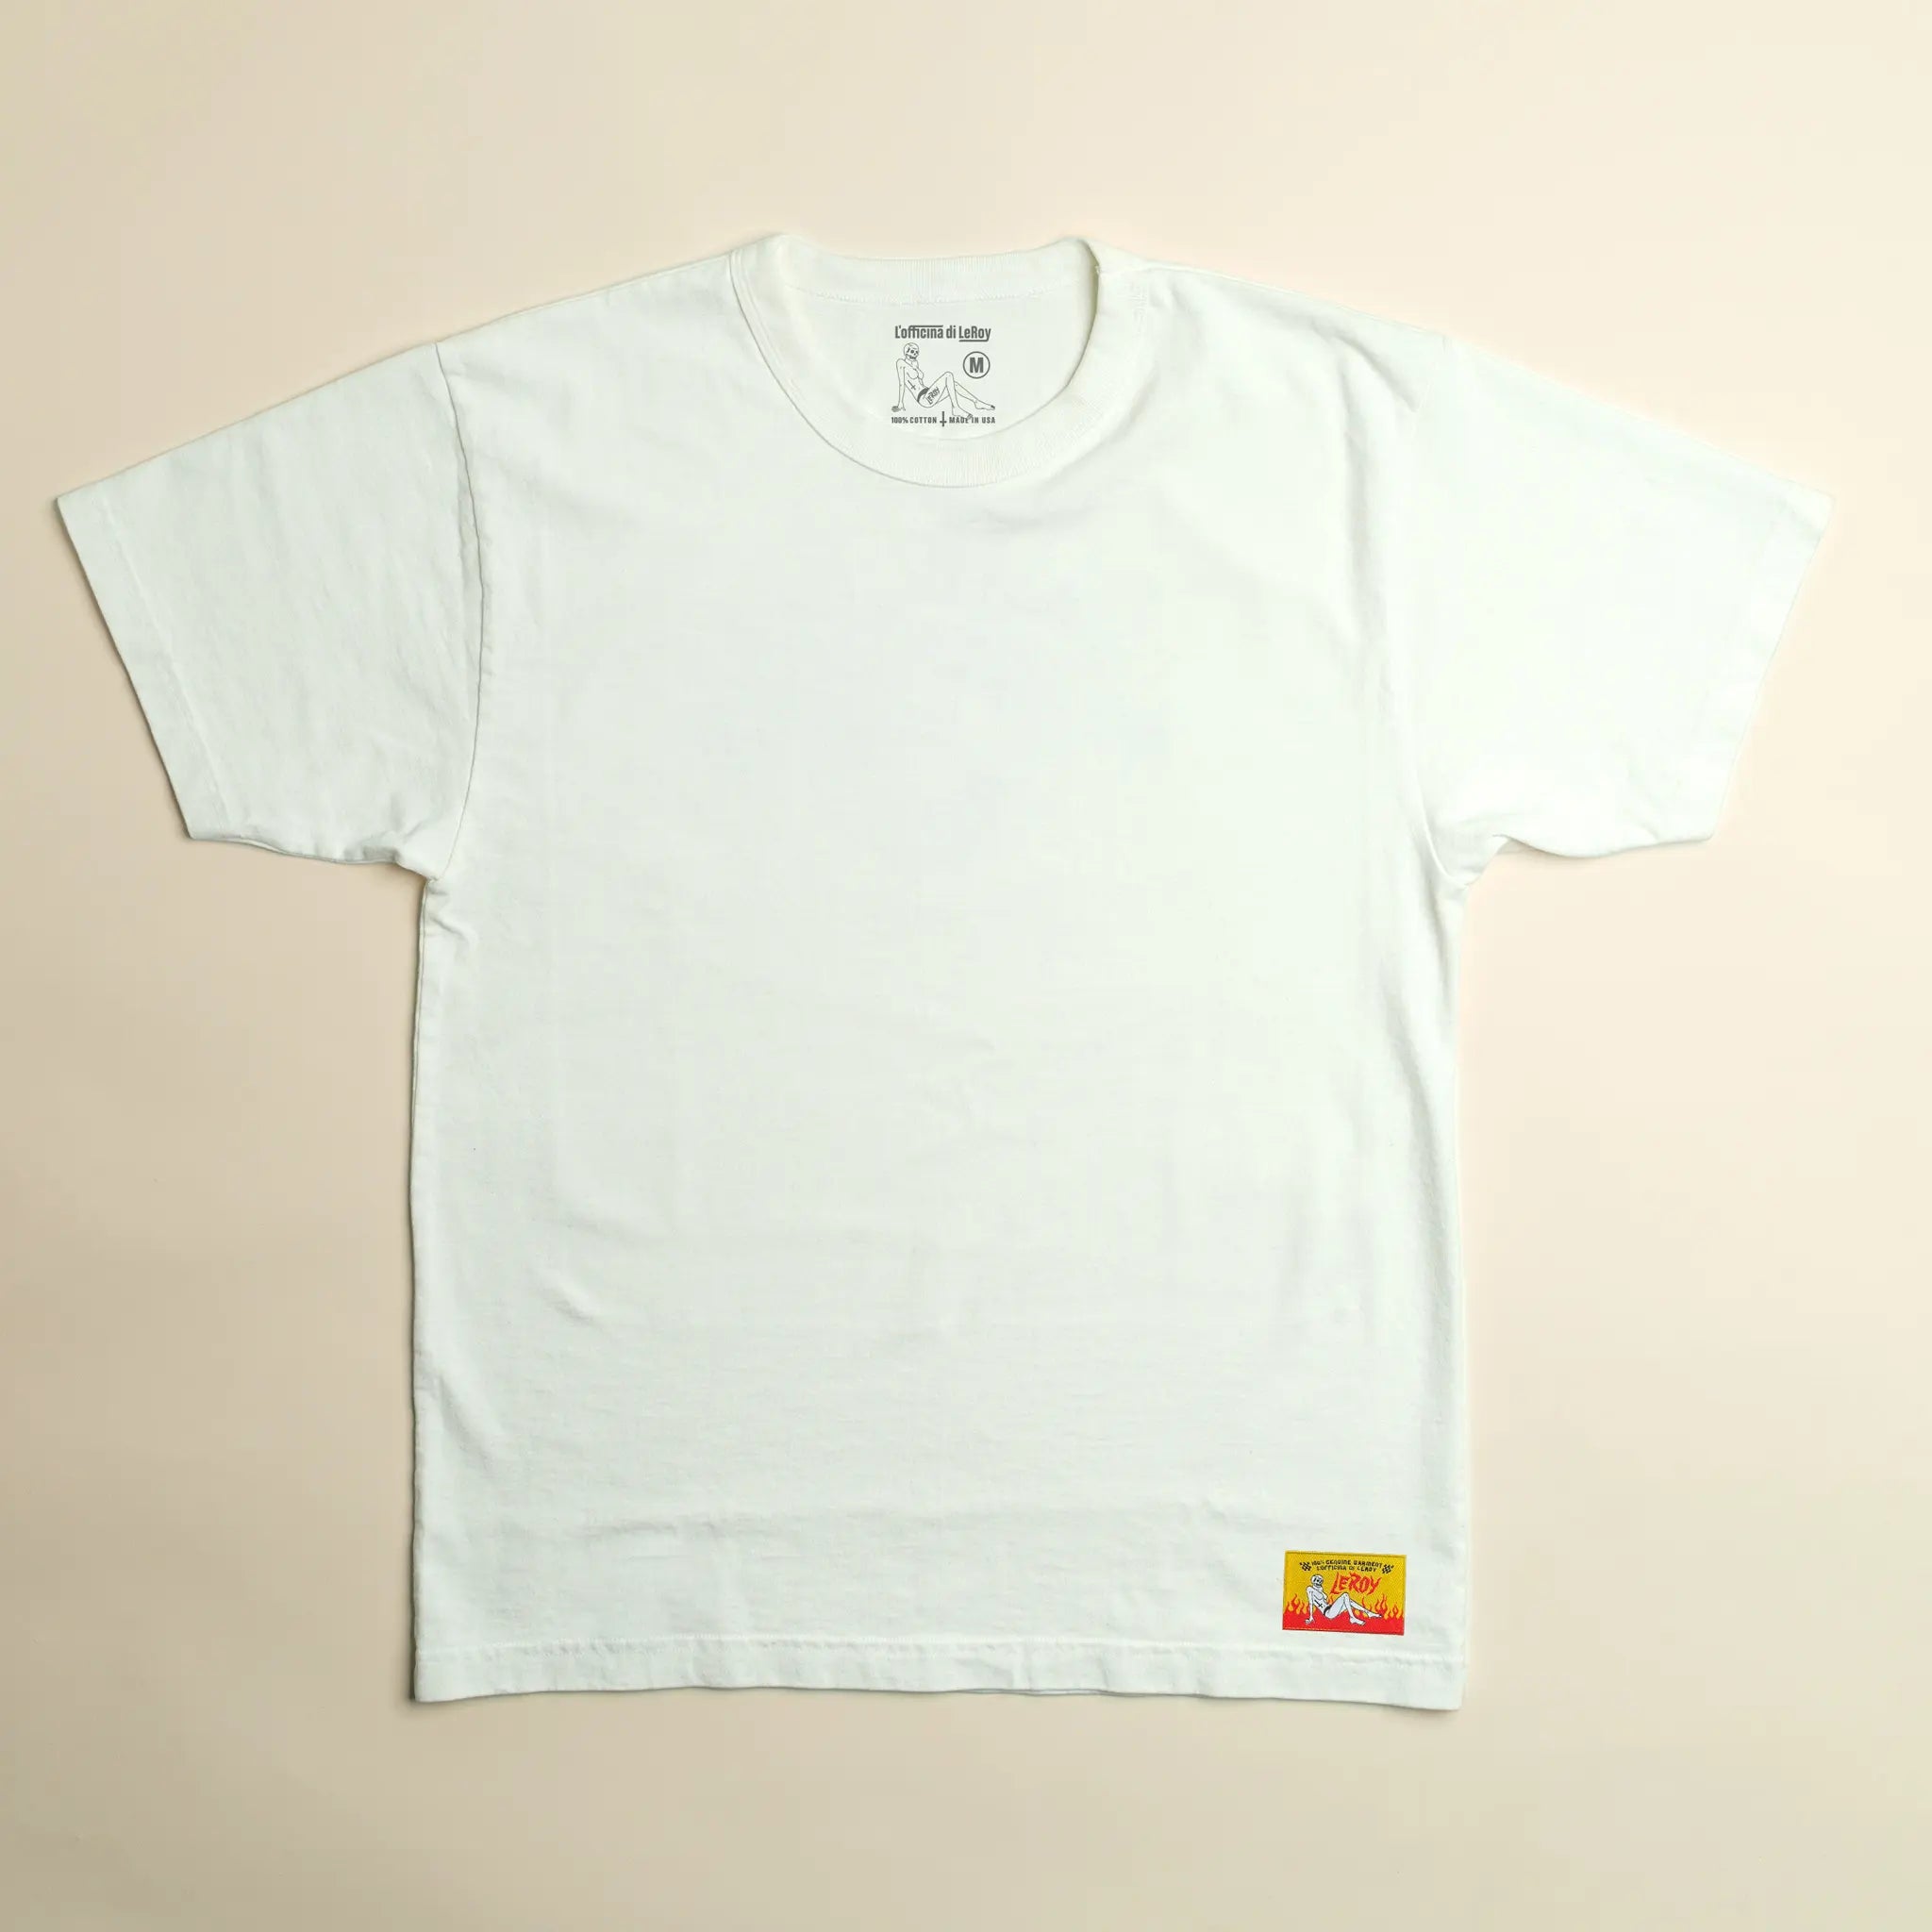 LeRoy Label Heavy Weight White T-Shirt